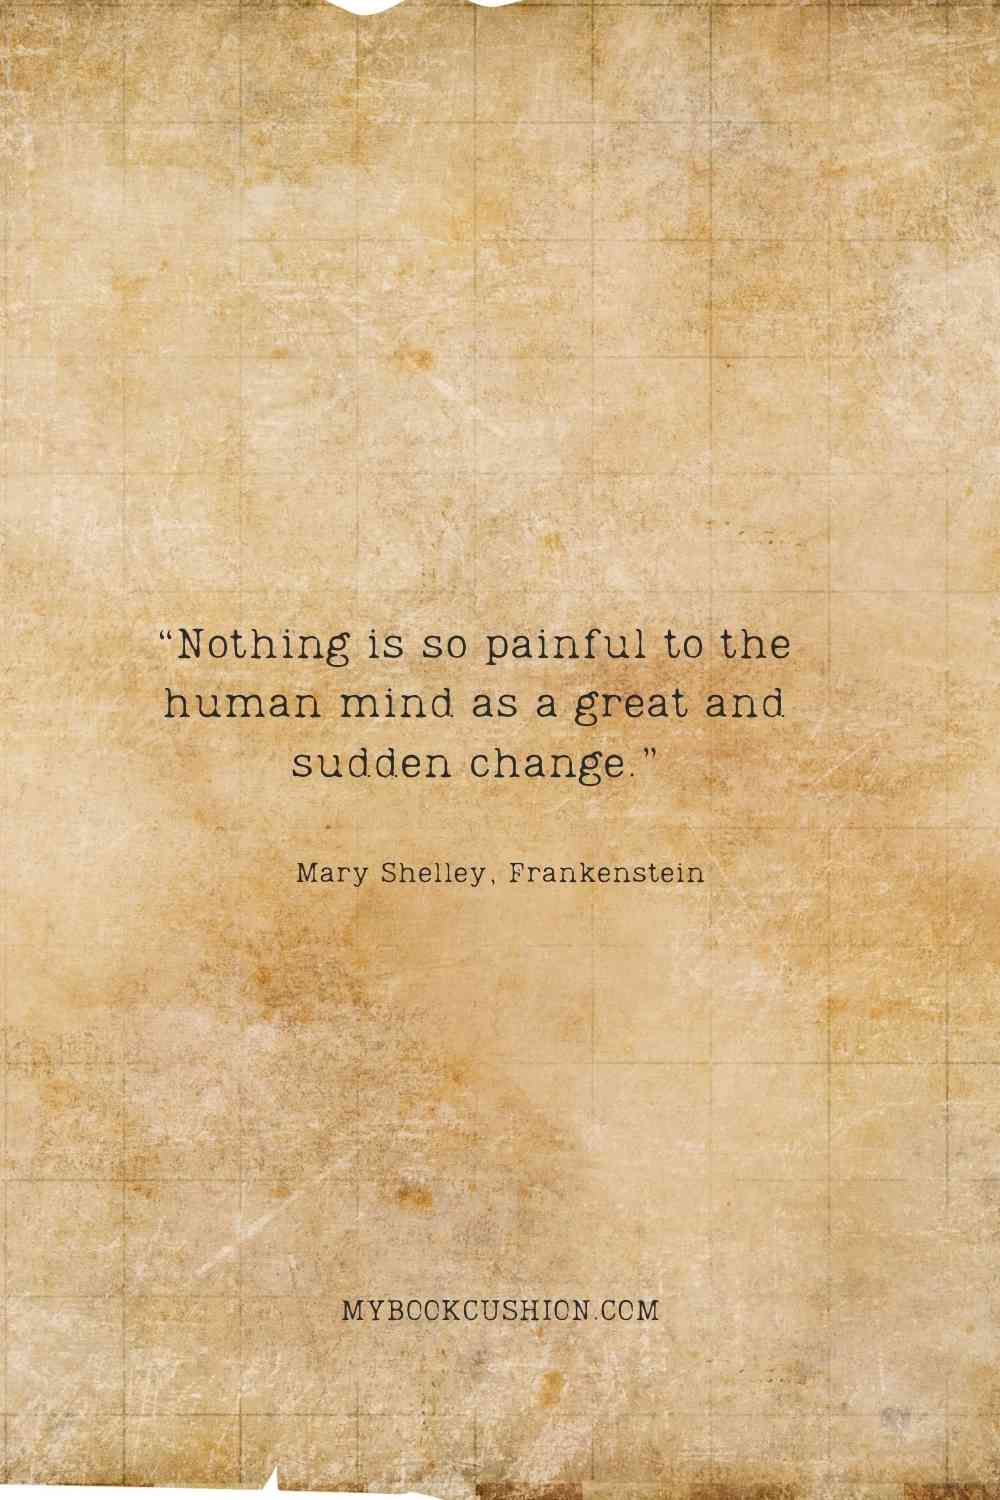 “Nothing is so painful to the human mind as a great and sudden change.” - Mary Shelley, Frankenstein